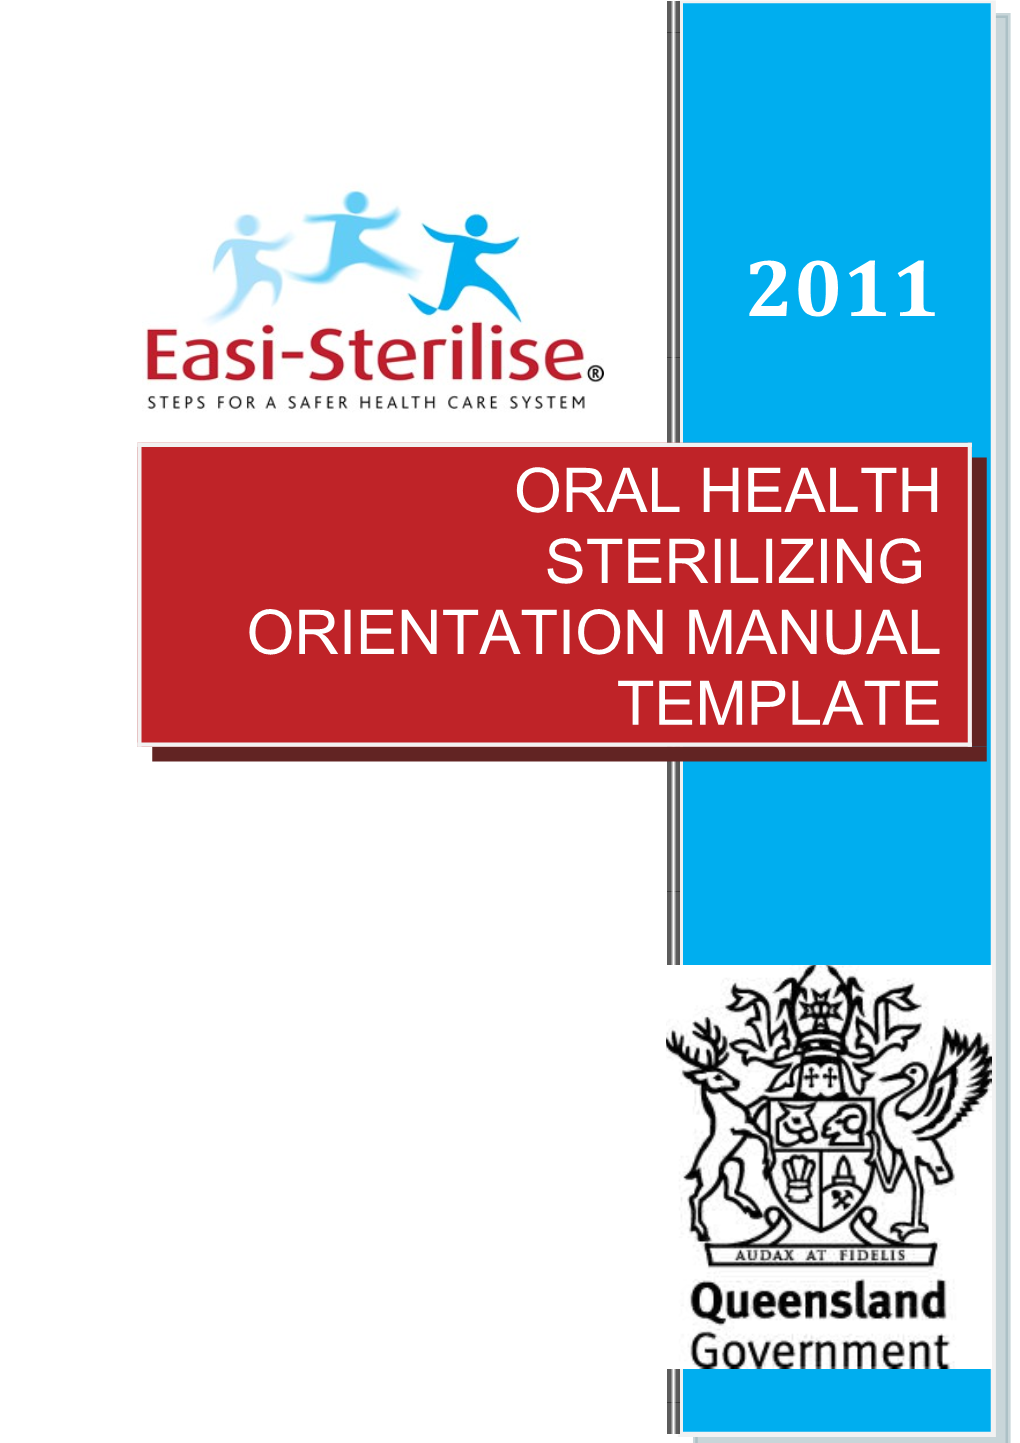 Orientation Template for Oral Health Reprocessing Staff